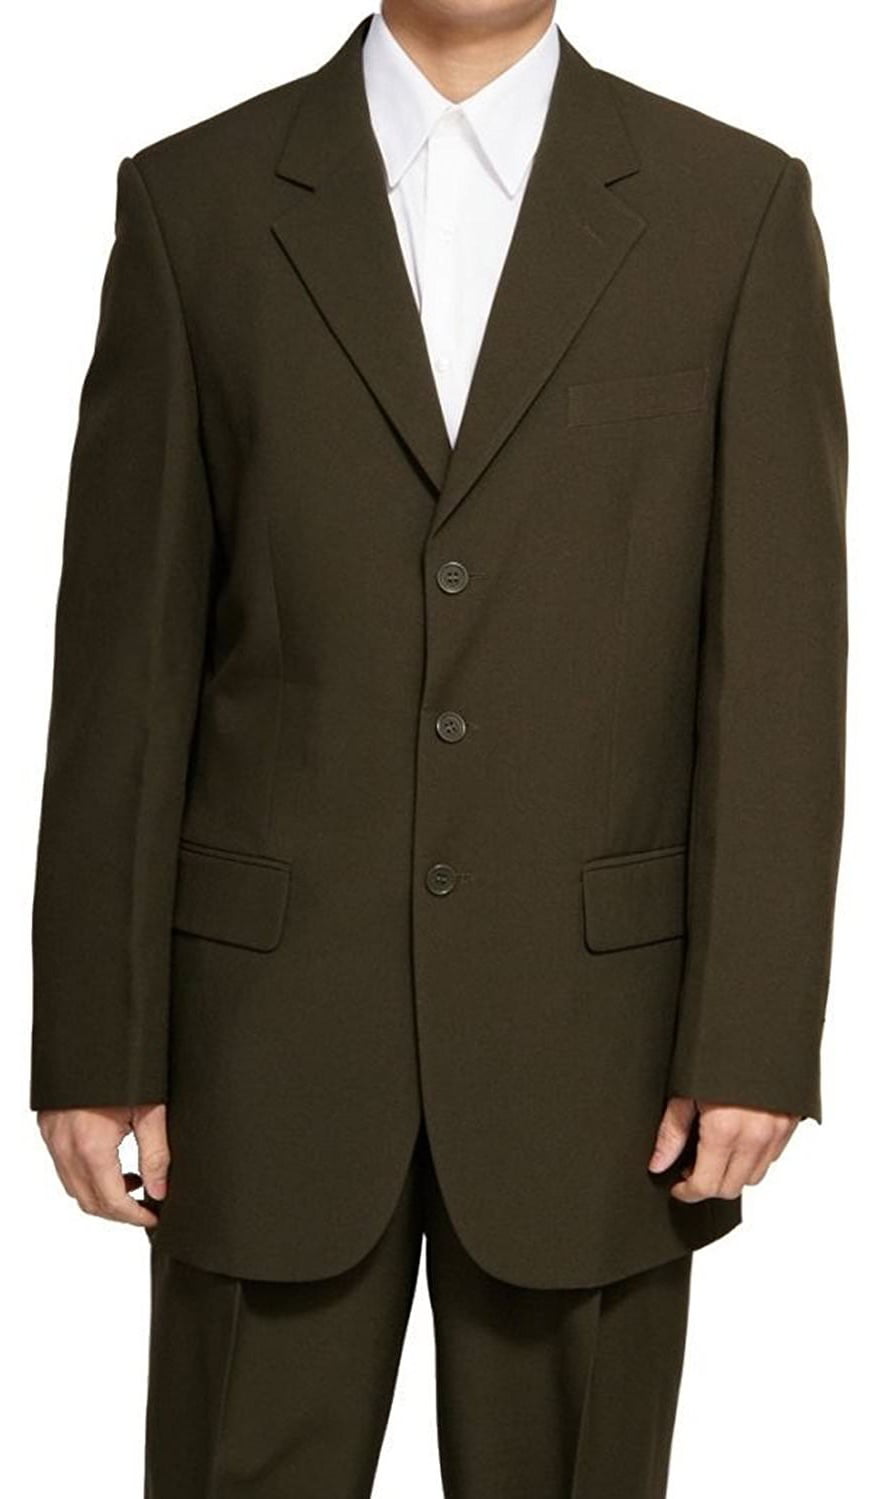 Men's Wool Feel 3 button Single Breasted Olive Suit Color Fortino Landi 